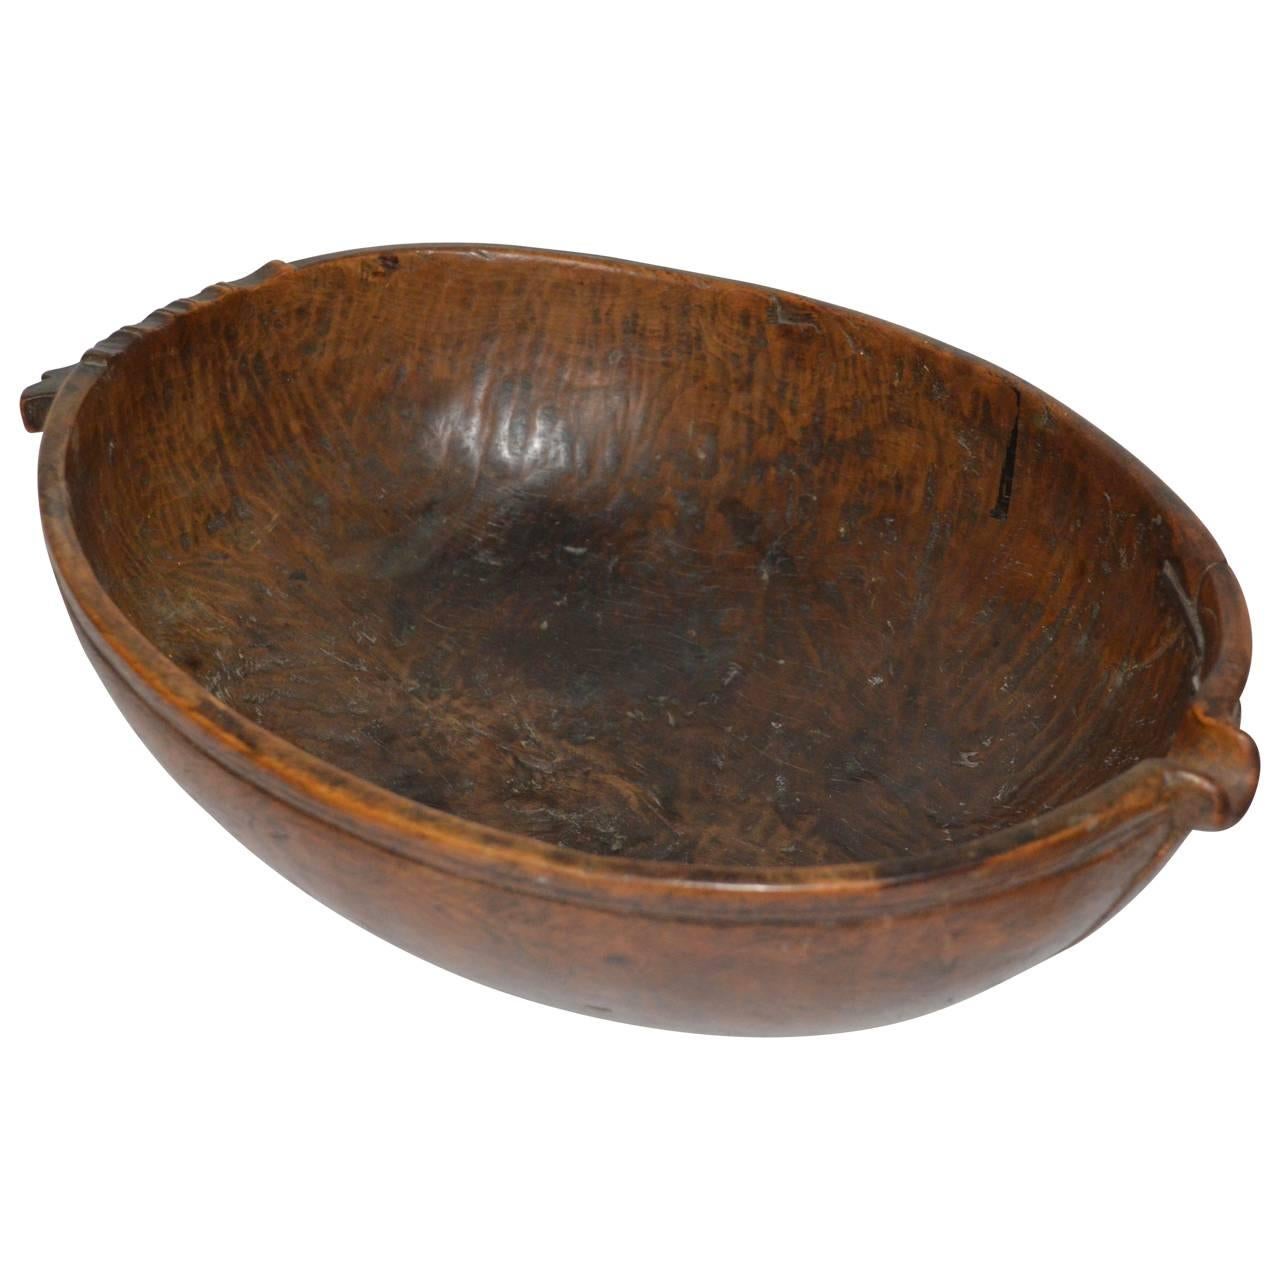 Folk Art 18th Century Carved Wooden Pouring Bowl